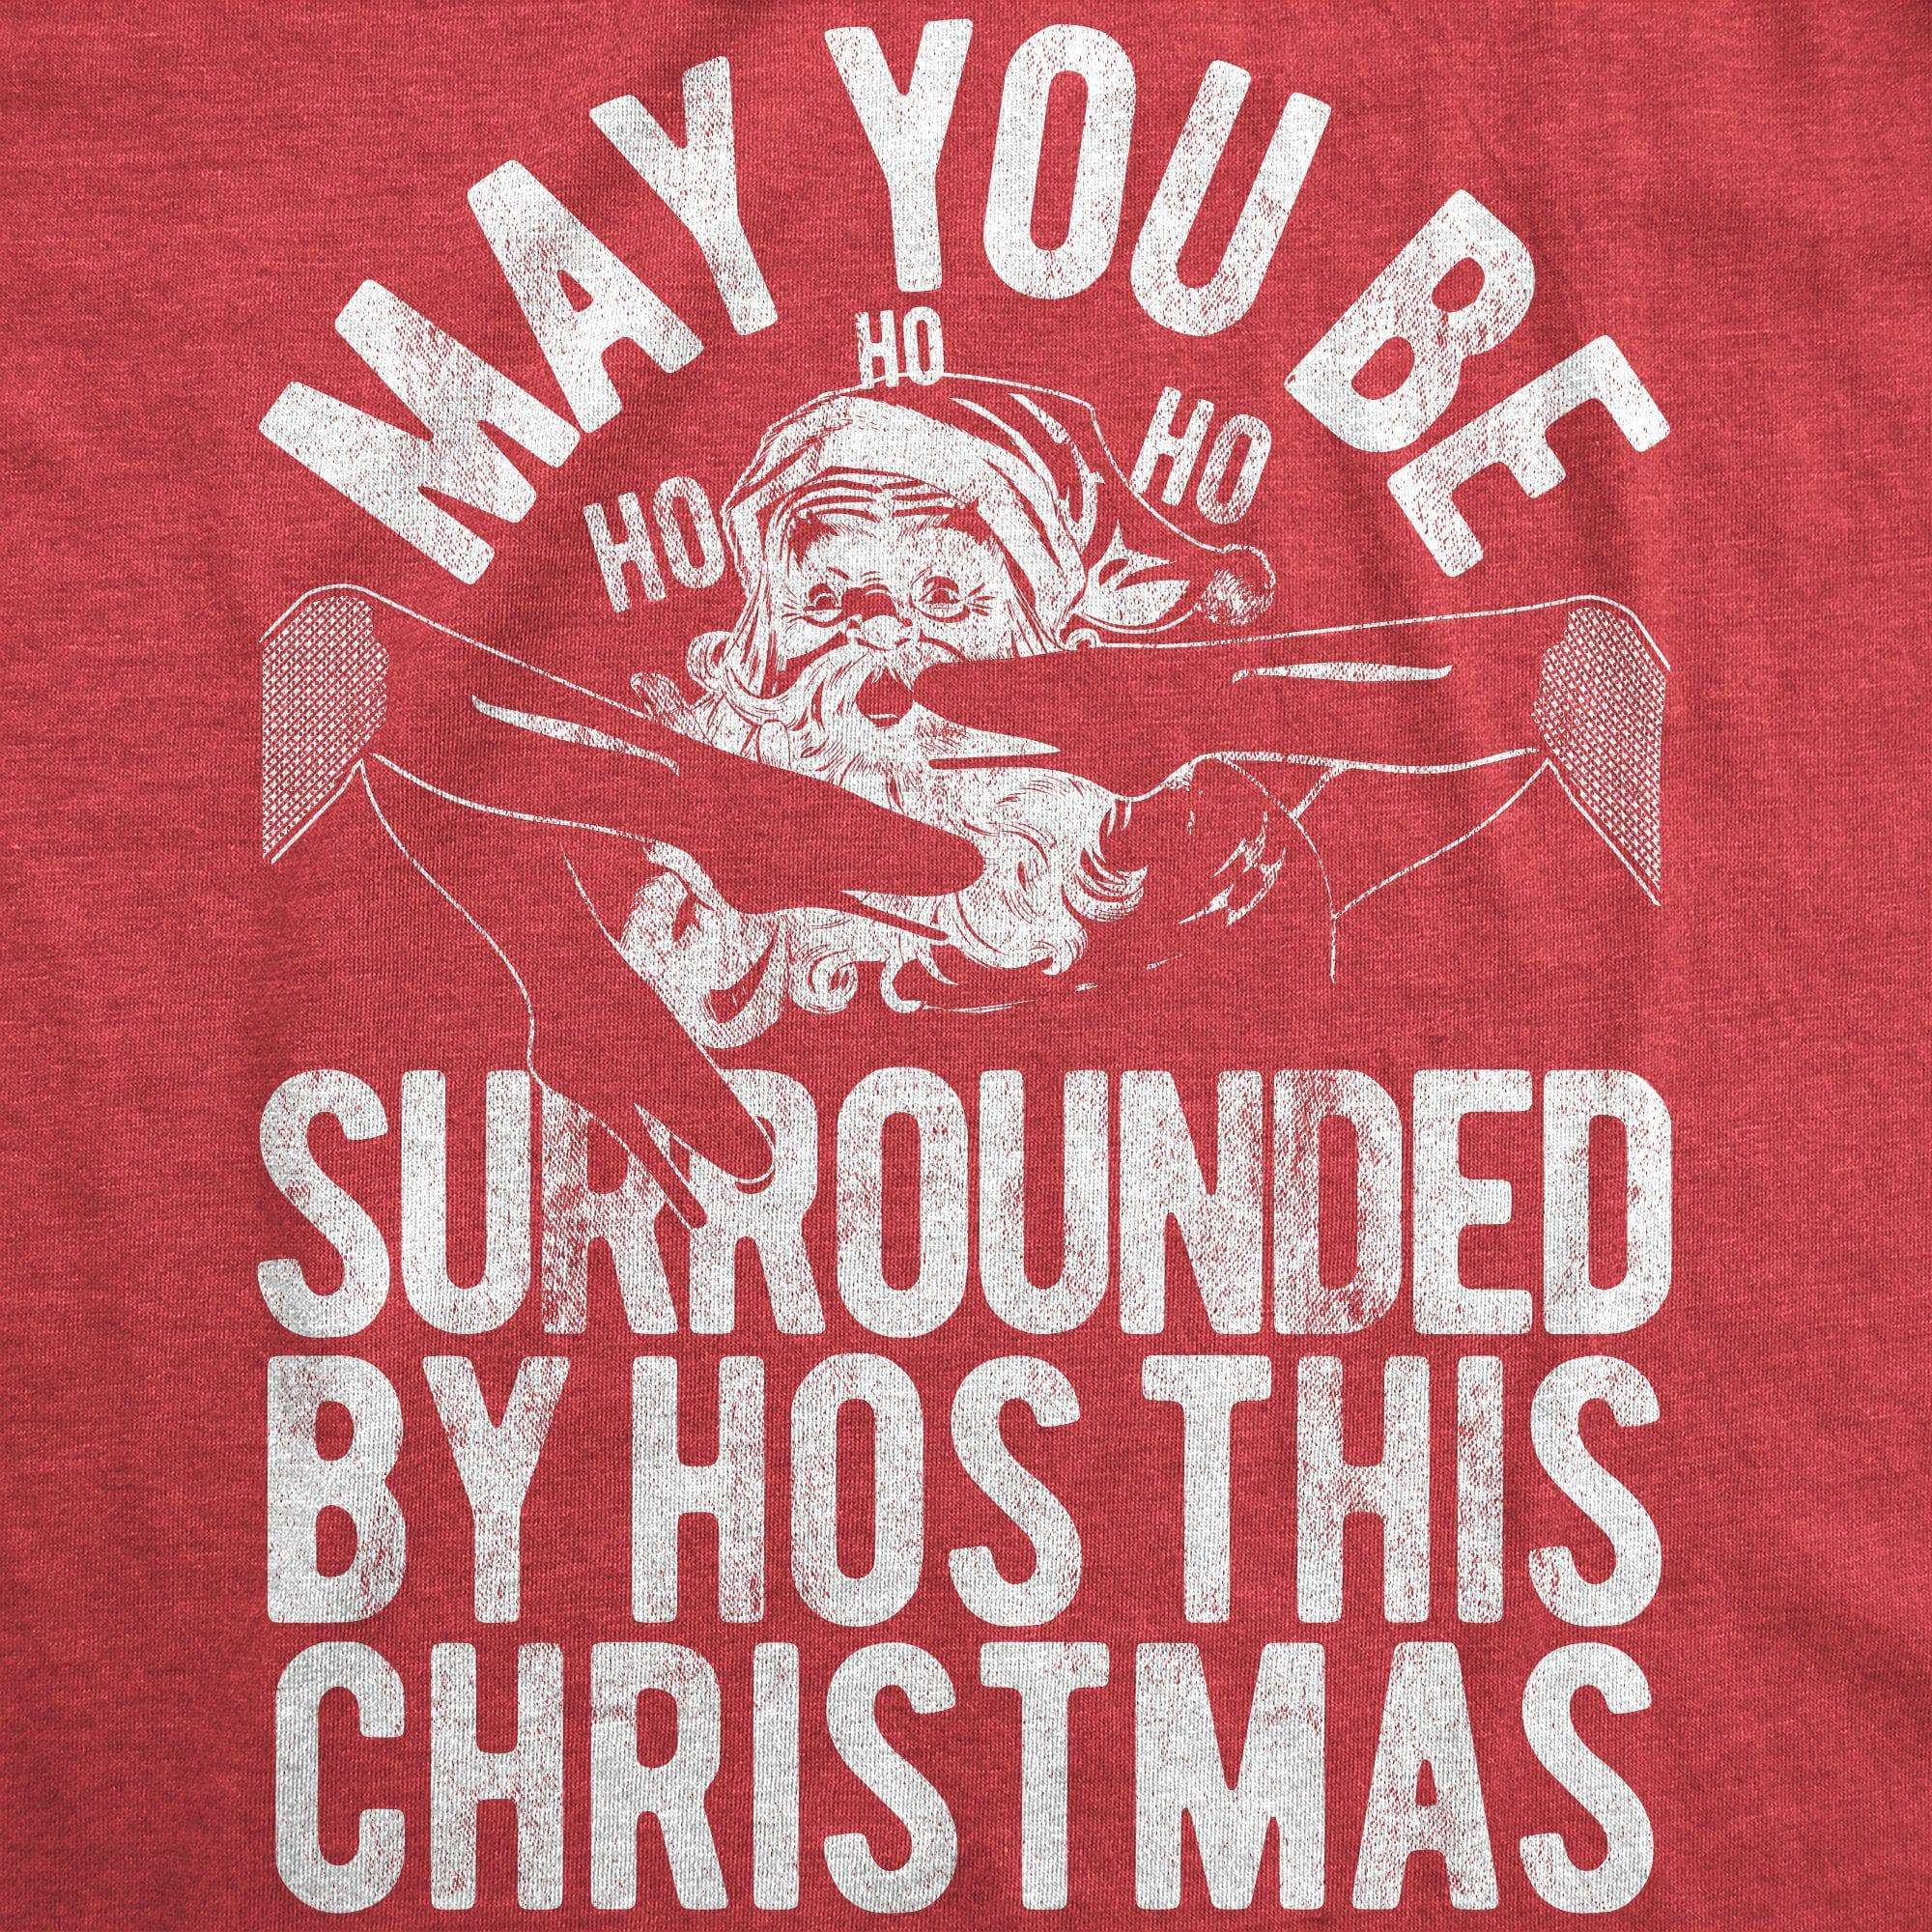 May You Be Surrounded By Hos This Christmas Men's Tshirt - Crazy Dog T-Shirts